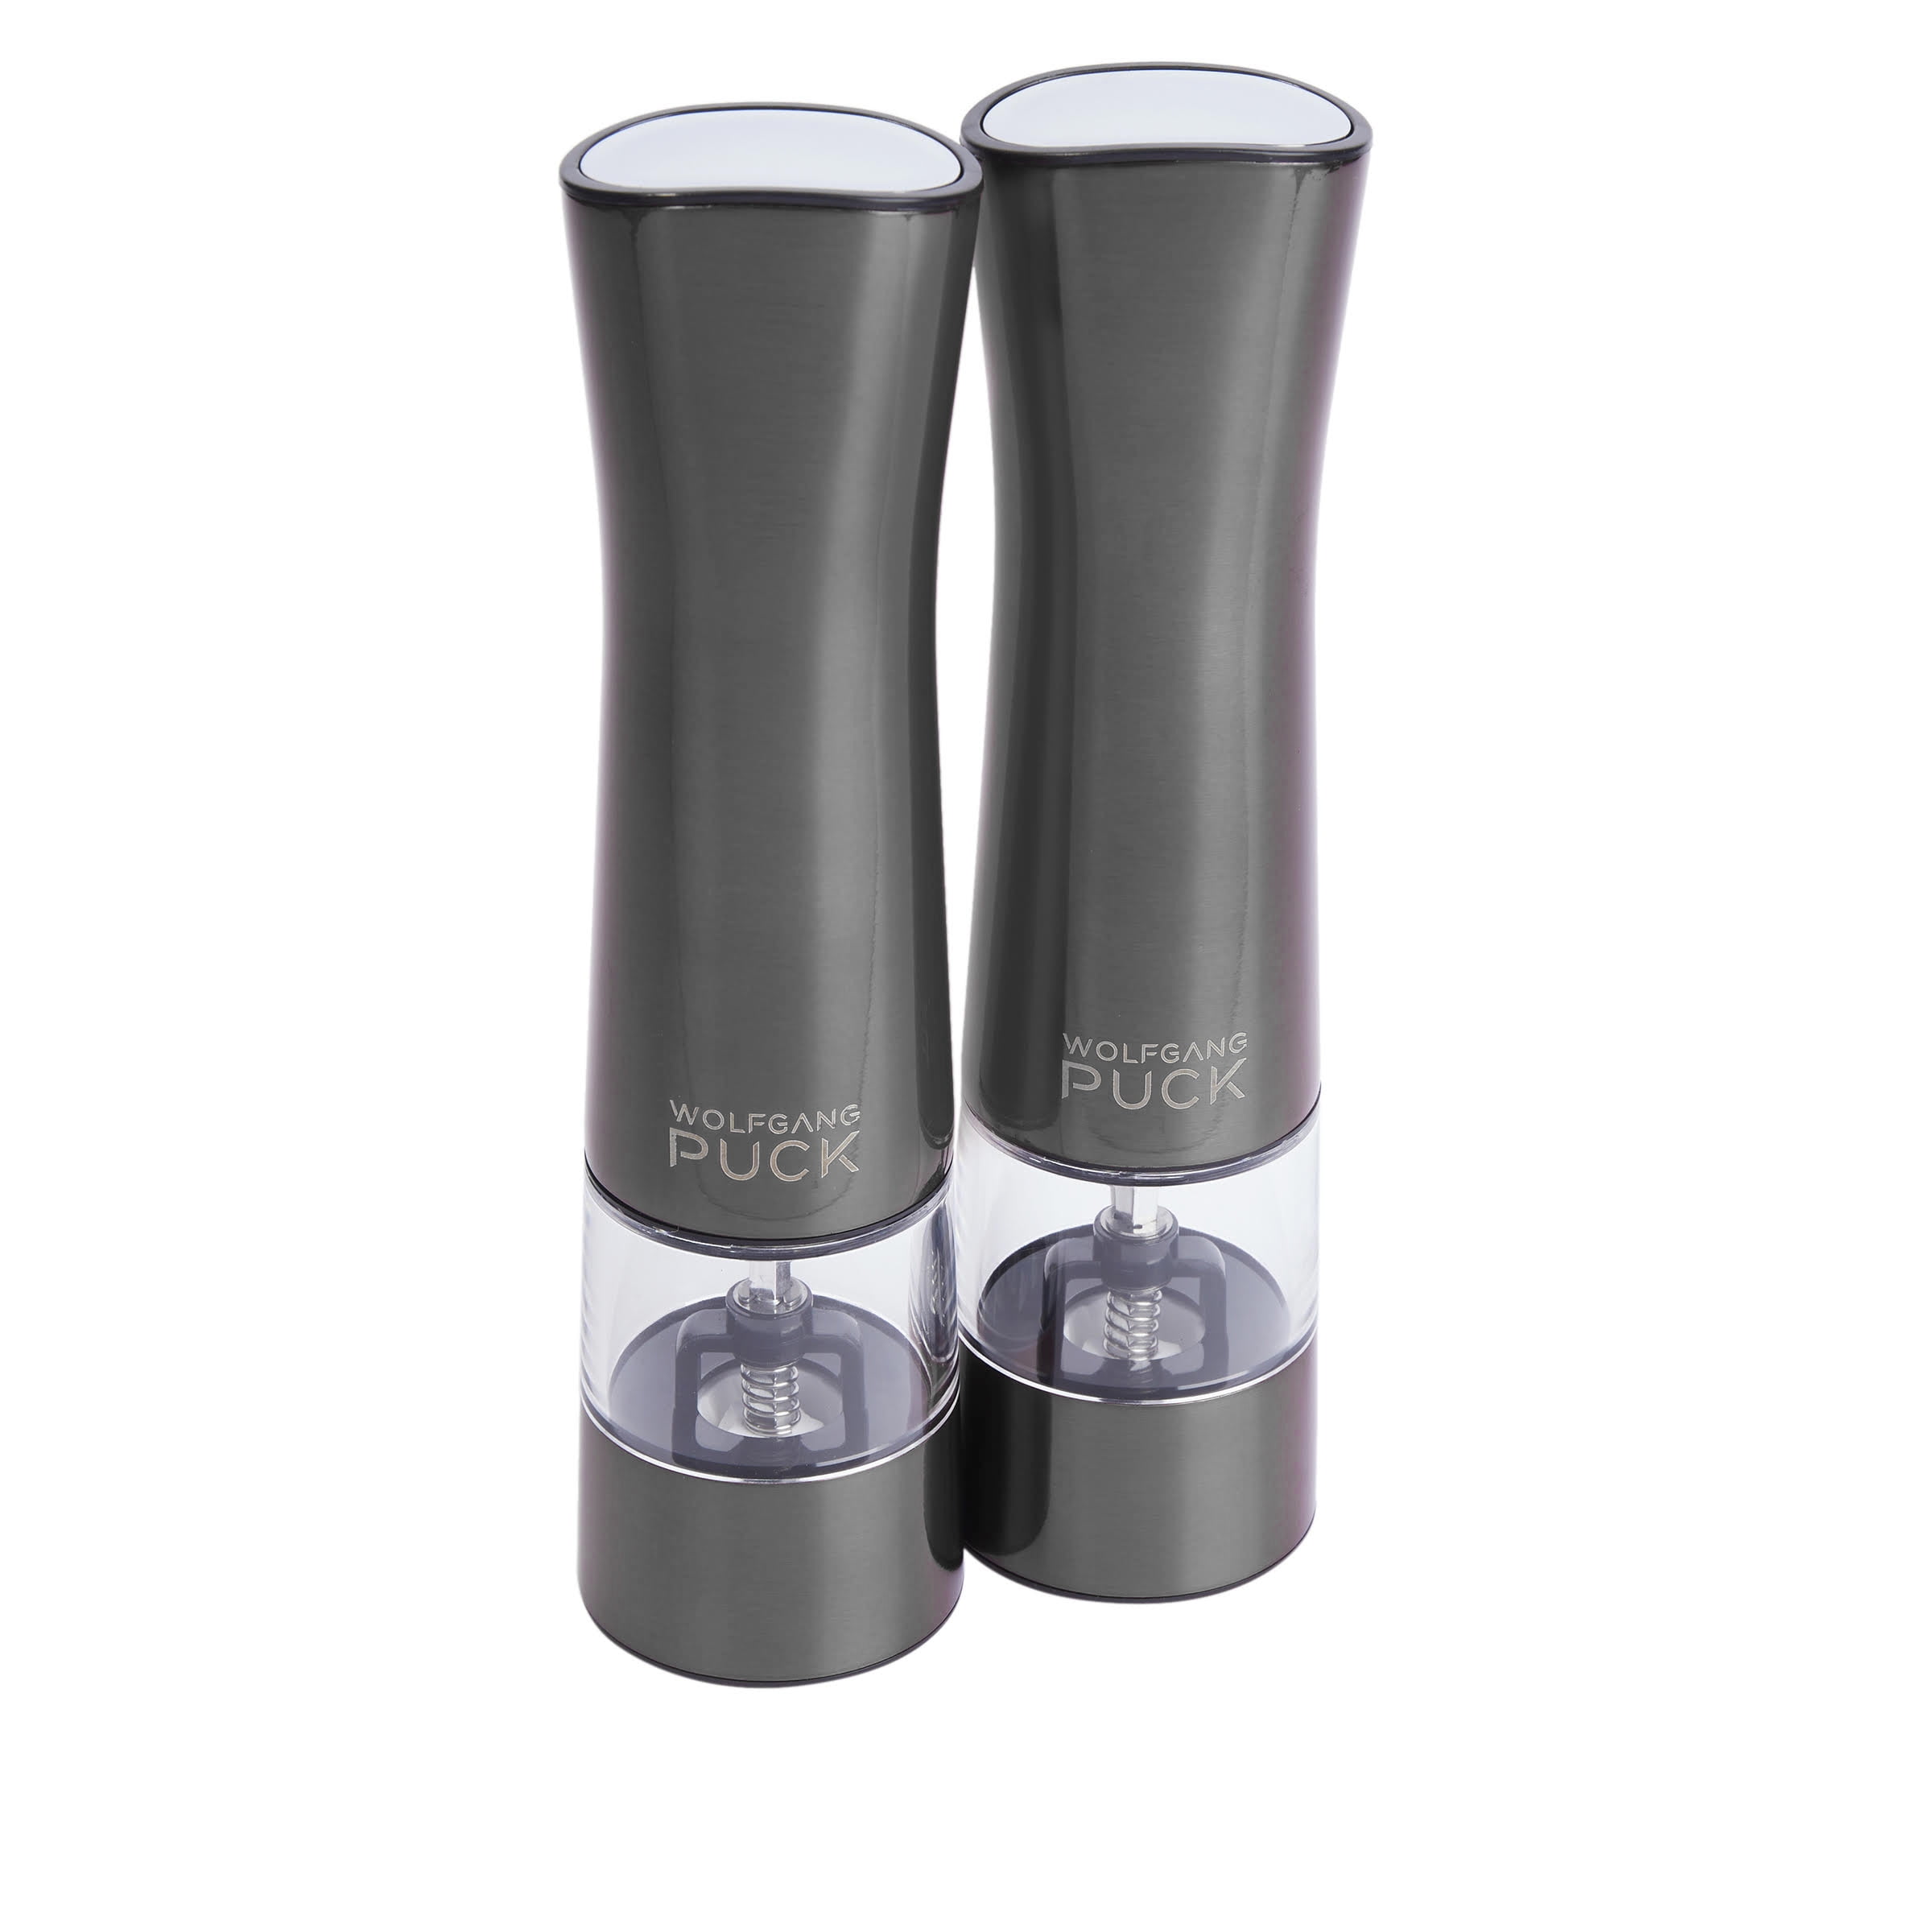 Wolfgang Puck Electric Brushed Stainless Steel Salt and Pepper